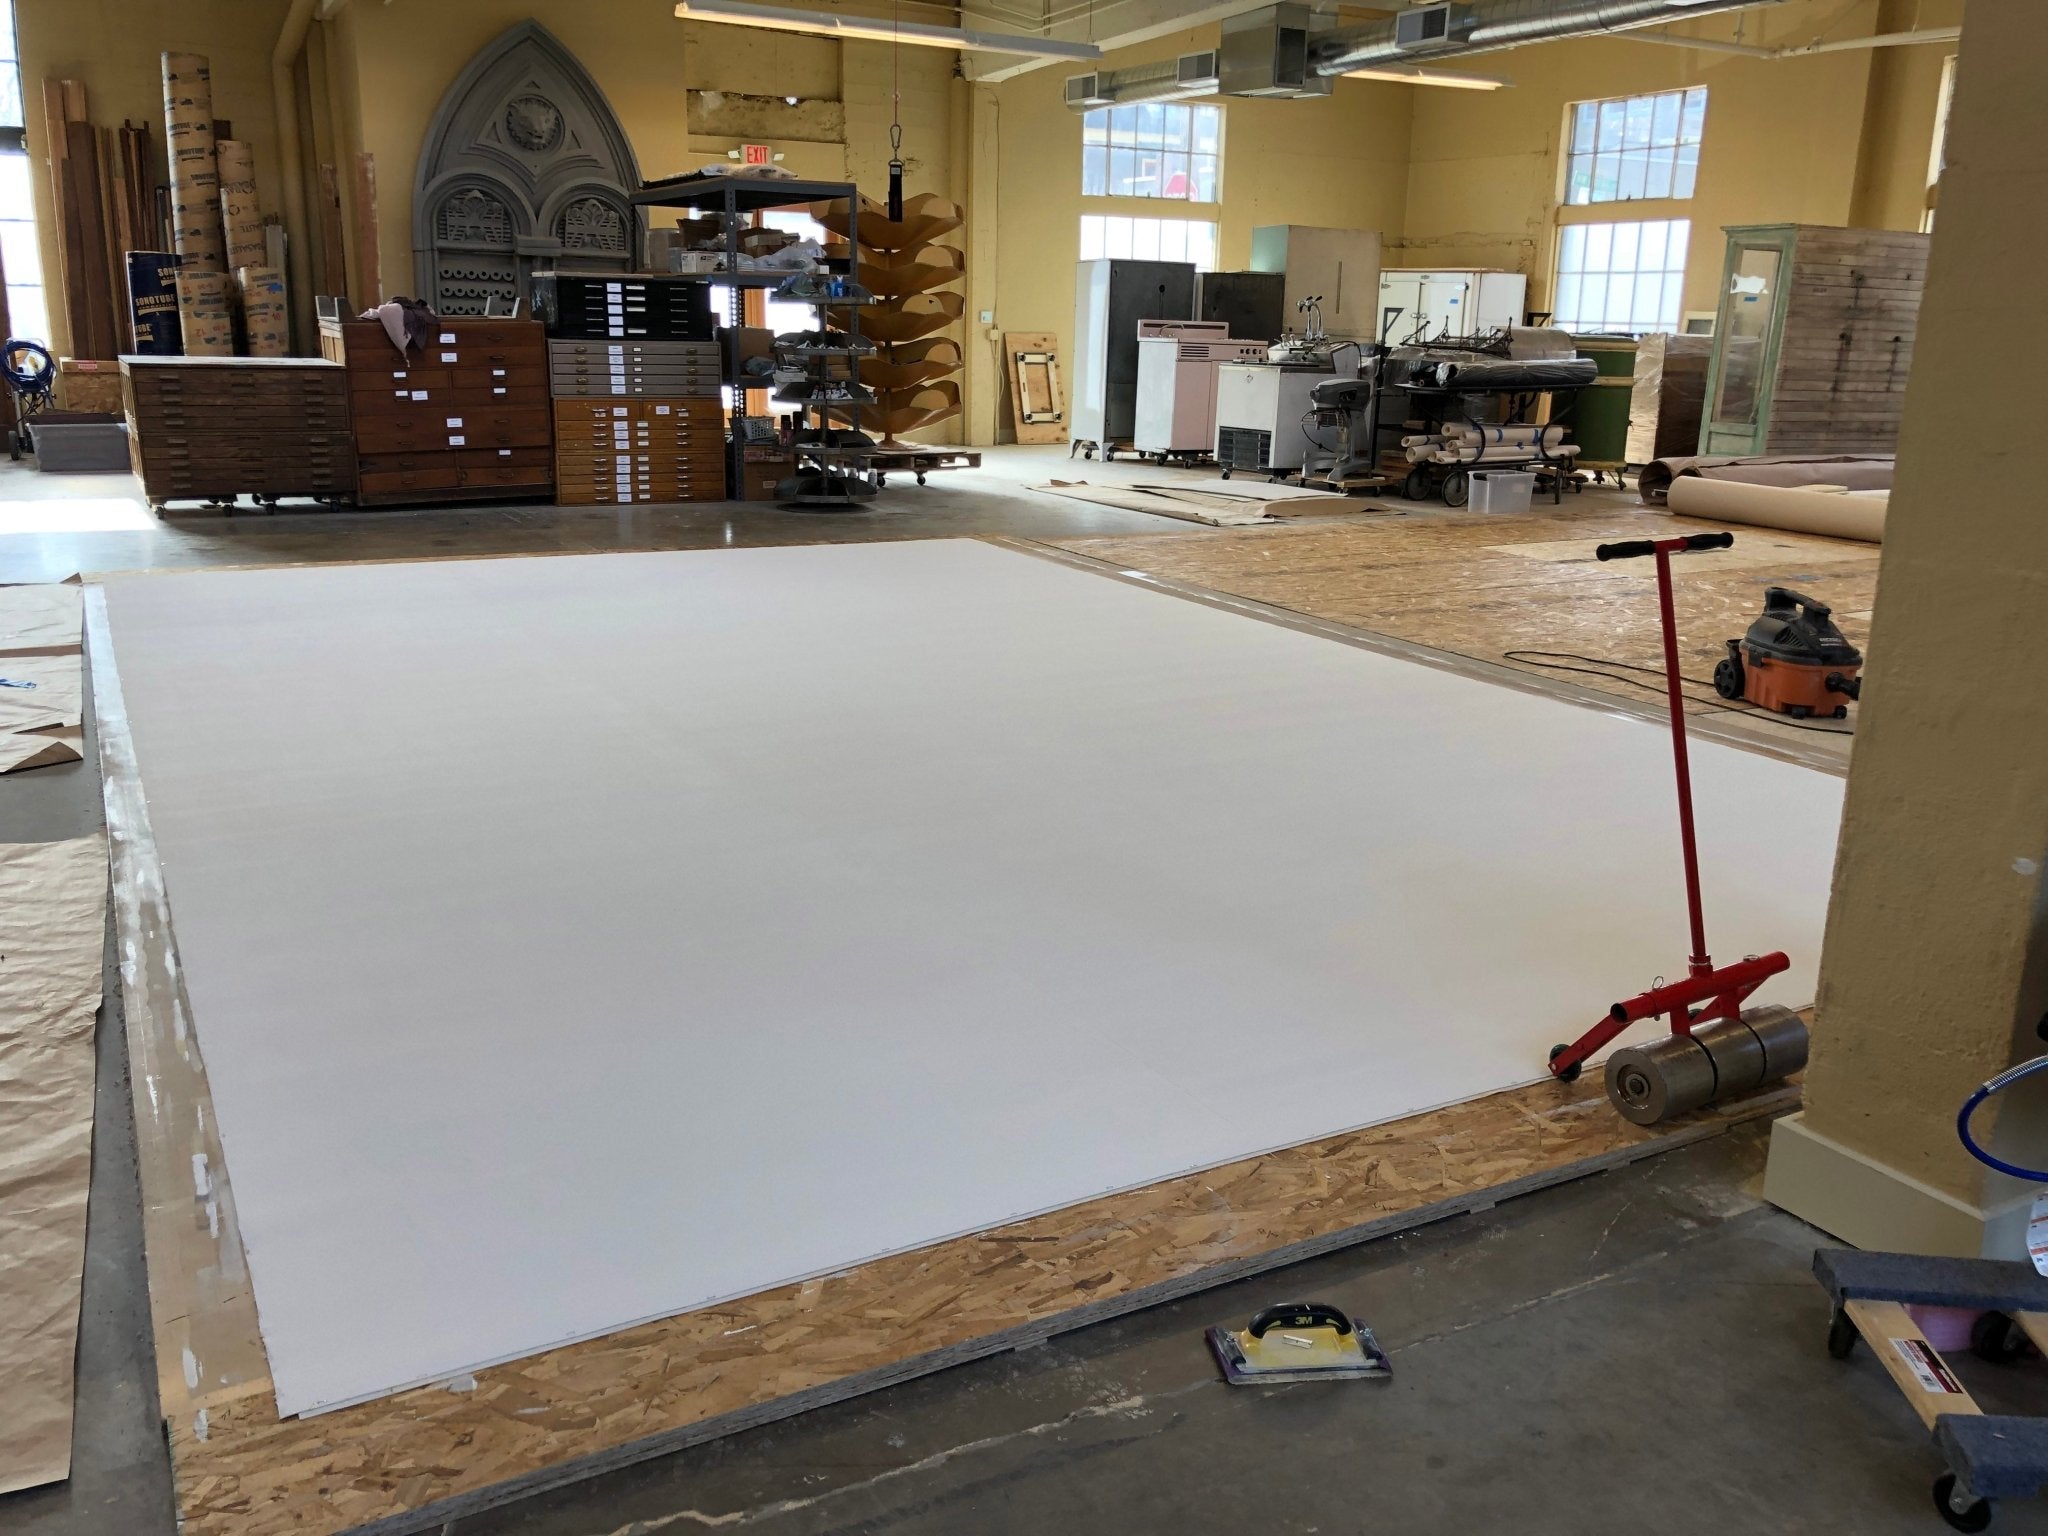 The completed 15' x 23' floorcloth base.